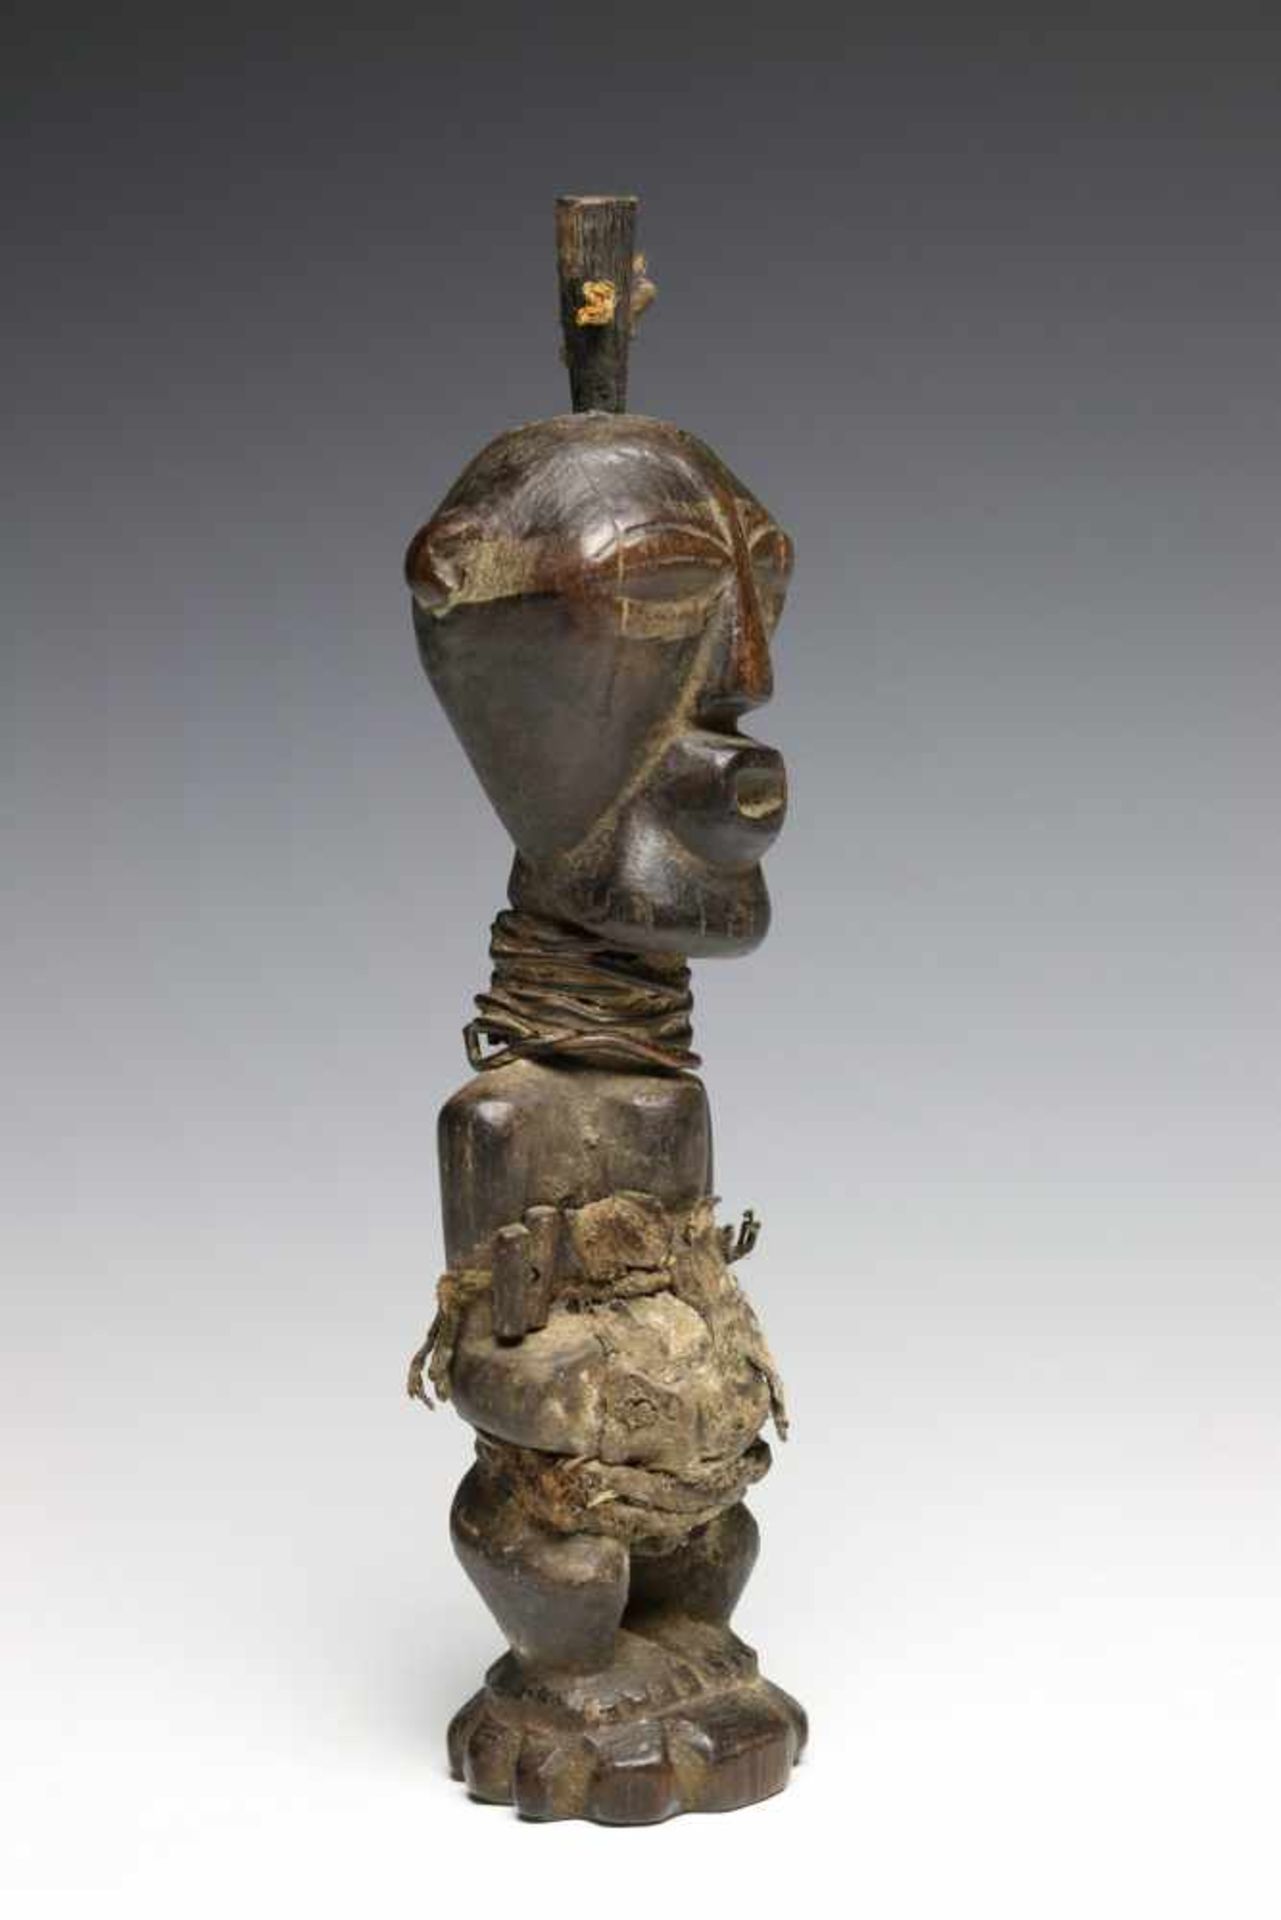 DRC., Songhe, small power figure,with horn, copper threads, animal skin and black offering